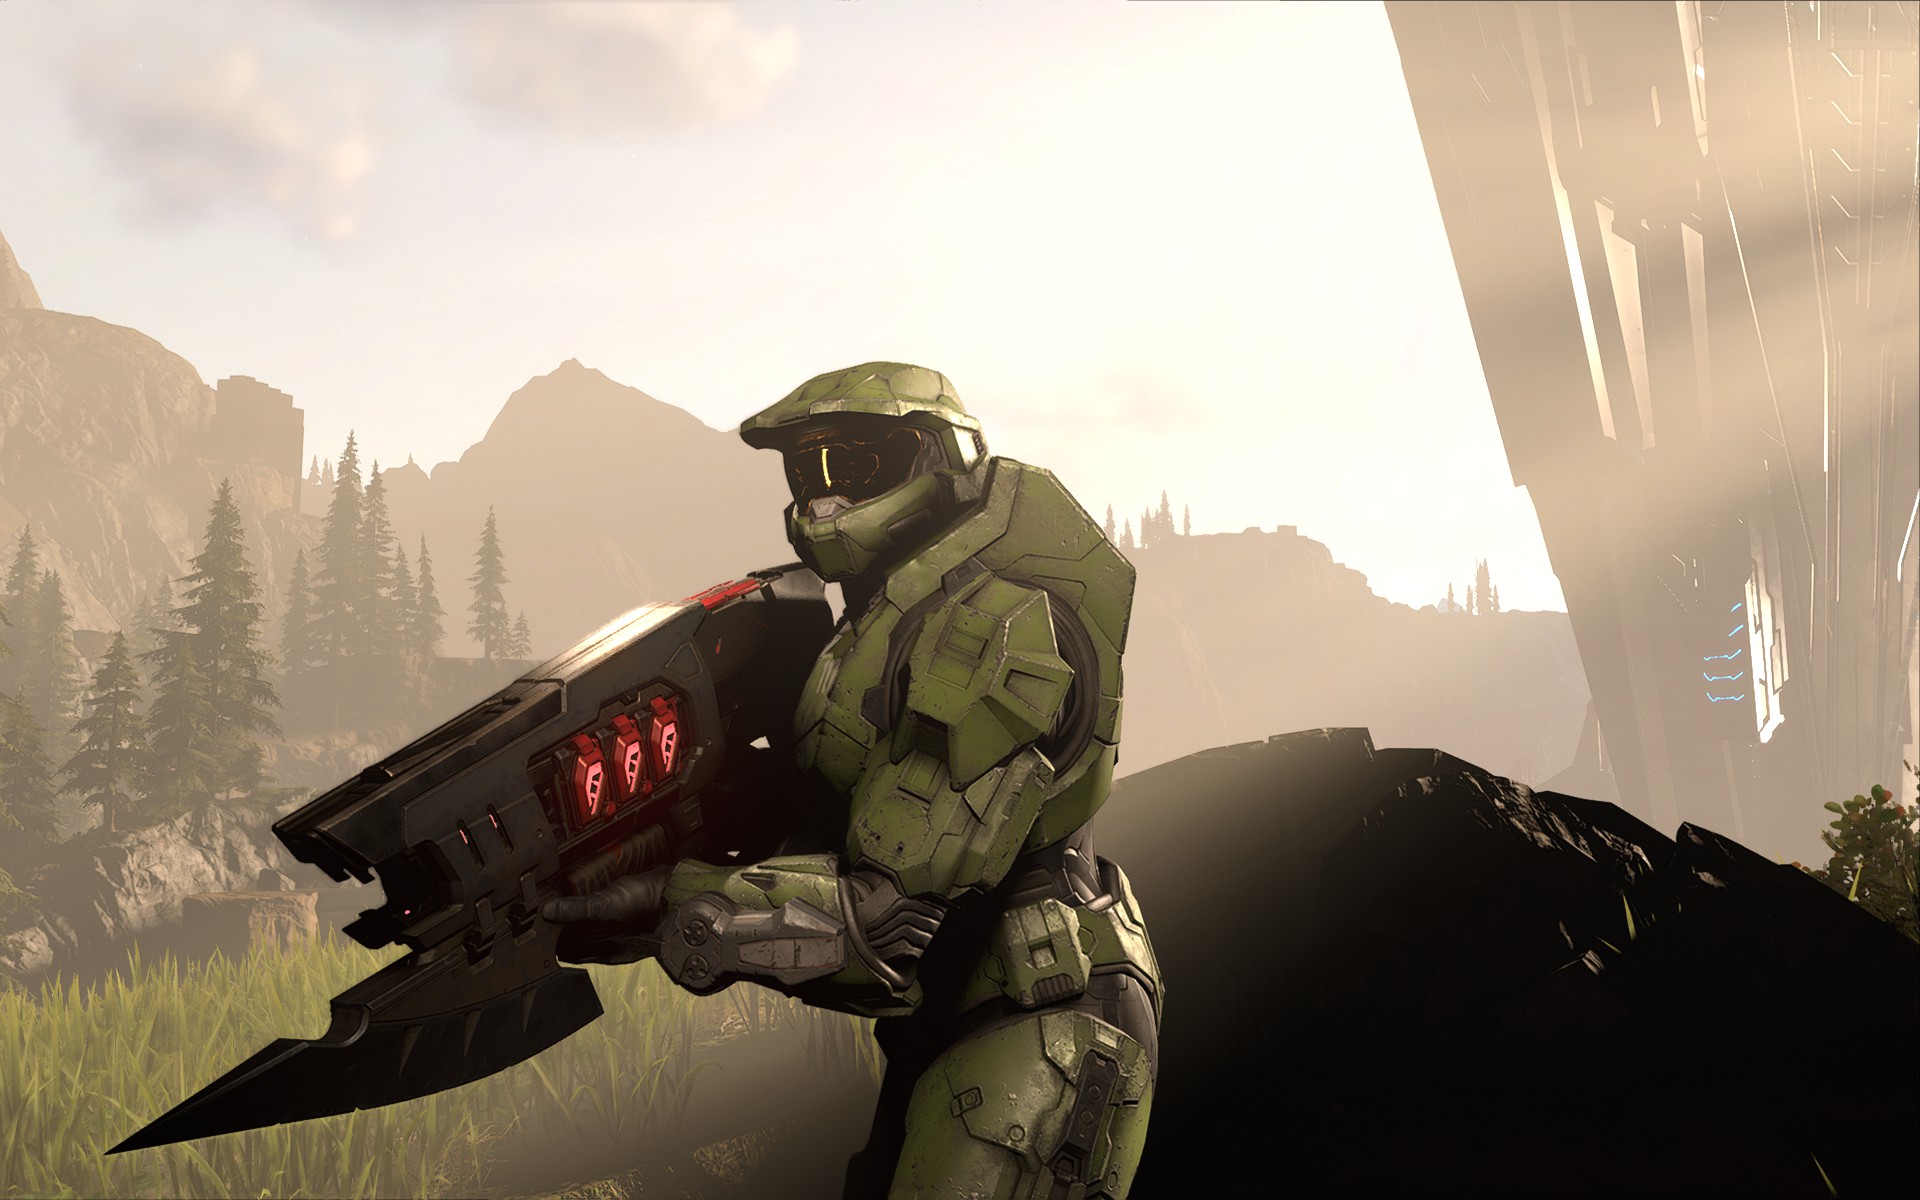  How to find Spartan Cores to upgrade your abilities in Halo Infinite 